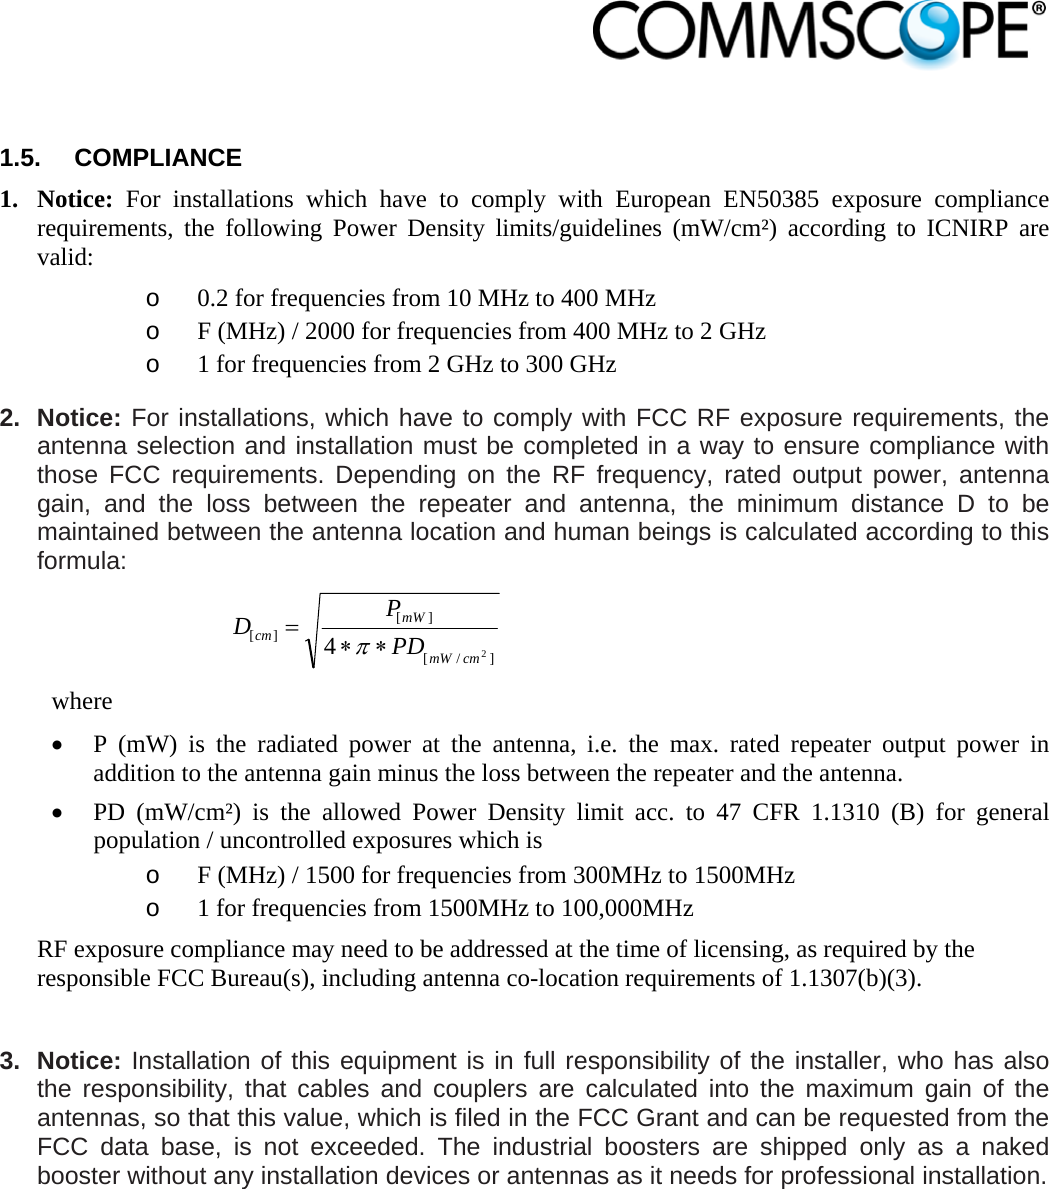                             1.5. COMPLIANCE 1. Notice: For installations which have to comply with European EN50385 exposure compliance requirements, the following Power Density limits/guidelines (mW/cm²) according to ICNIRP are valid: o 0.2 for frequencies from 10 MHz to 400 MHz o F (MHz) / 2000 for frequencies from 400 MHz to 2 GHz o 1 for frequencies from 2 GHz to 300 GHz 2. Notice: For installations, which have to comply with FCC RF exposure requirements, the antenna selection and installation must be completed in a way to ensure compliance with those FCC requirements. Depending on the RF frequency, rated output power, antenna gain, and the loss between the repeater and antenna, the minimum distance D to be maintained between the antenna location and human beings is calculated according to this formula:  ]/[][][24cmmWmWcm PDPD  where  P (mW) is the radiated power at the antenna, i.e. the max. rated repeater output power in addition to the antenna gain minus the loss between the repeater and the antenna.  PD (mW/cm²) is the allowed Power Density limit acc. to 47 CFR 1.1310 (B) for general population / uncontrolled exposures which is o F (MHz) / 1500 for frequencies from 300MHz to 1500MHz o 1 for frequencies from 1500MHz to 100,000MHz RF exposure compliance may need to be addressed at the time of licensing, as required by the responsible FCC Bureau(s), including antenna co-location requirements of 1.1307(b)(3).  3. Notice: Installation of this equipment is in full responsibility of the installer, who has also the responsibility, that cables and couplers are calculated into the maximum gain of the antennas, so that this value, which is filed in the FCC Grant and can be requested from the FCC data base, is not exceeded. The industrial boosters are shipped only as a naked booster without any installation devices or antennas as it needs for professional installation. 